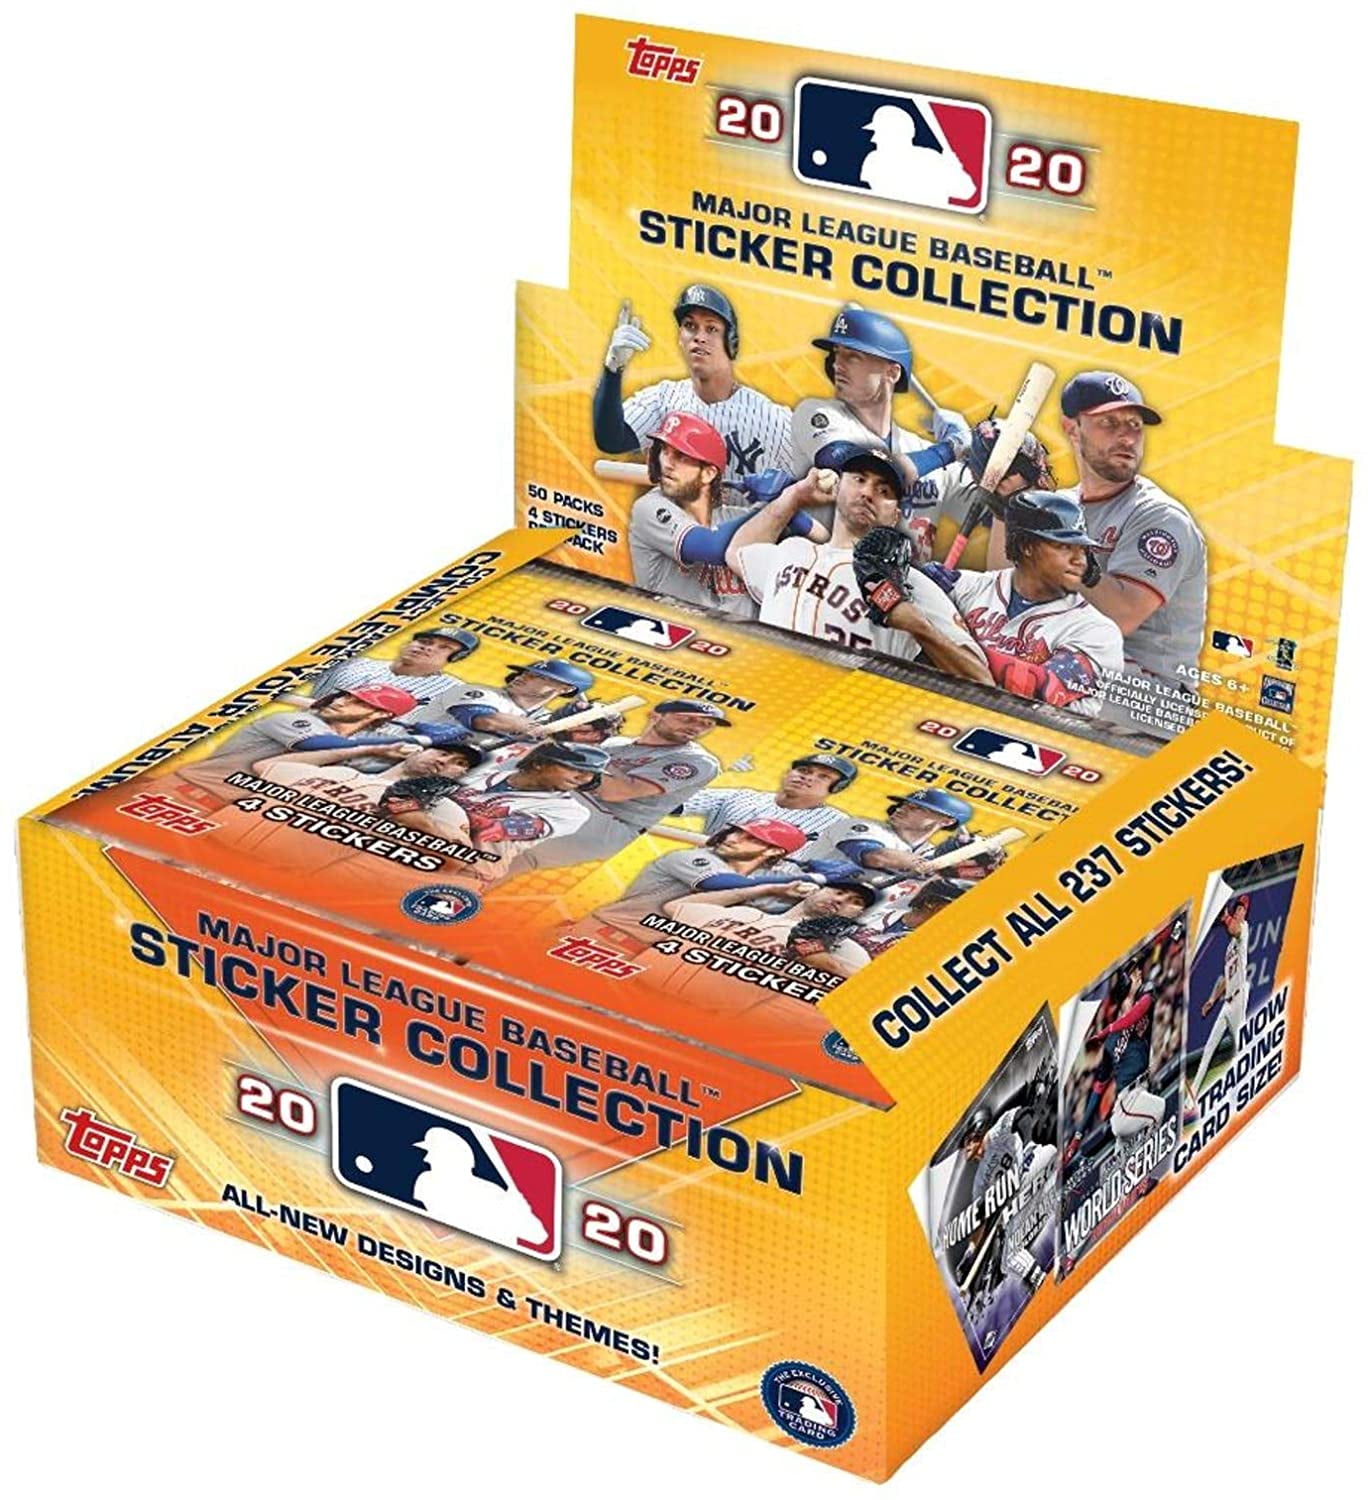 2019 Topps Baseball Stickers EXCLUSIVE 16 Box Blaster CASE-640 Sticker+16 Poster 